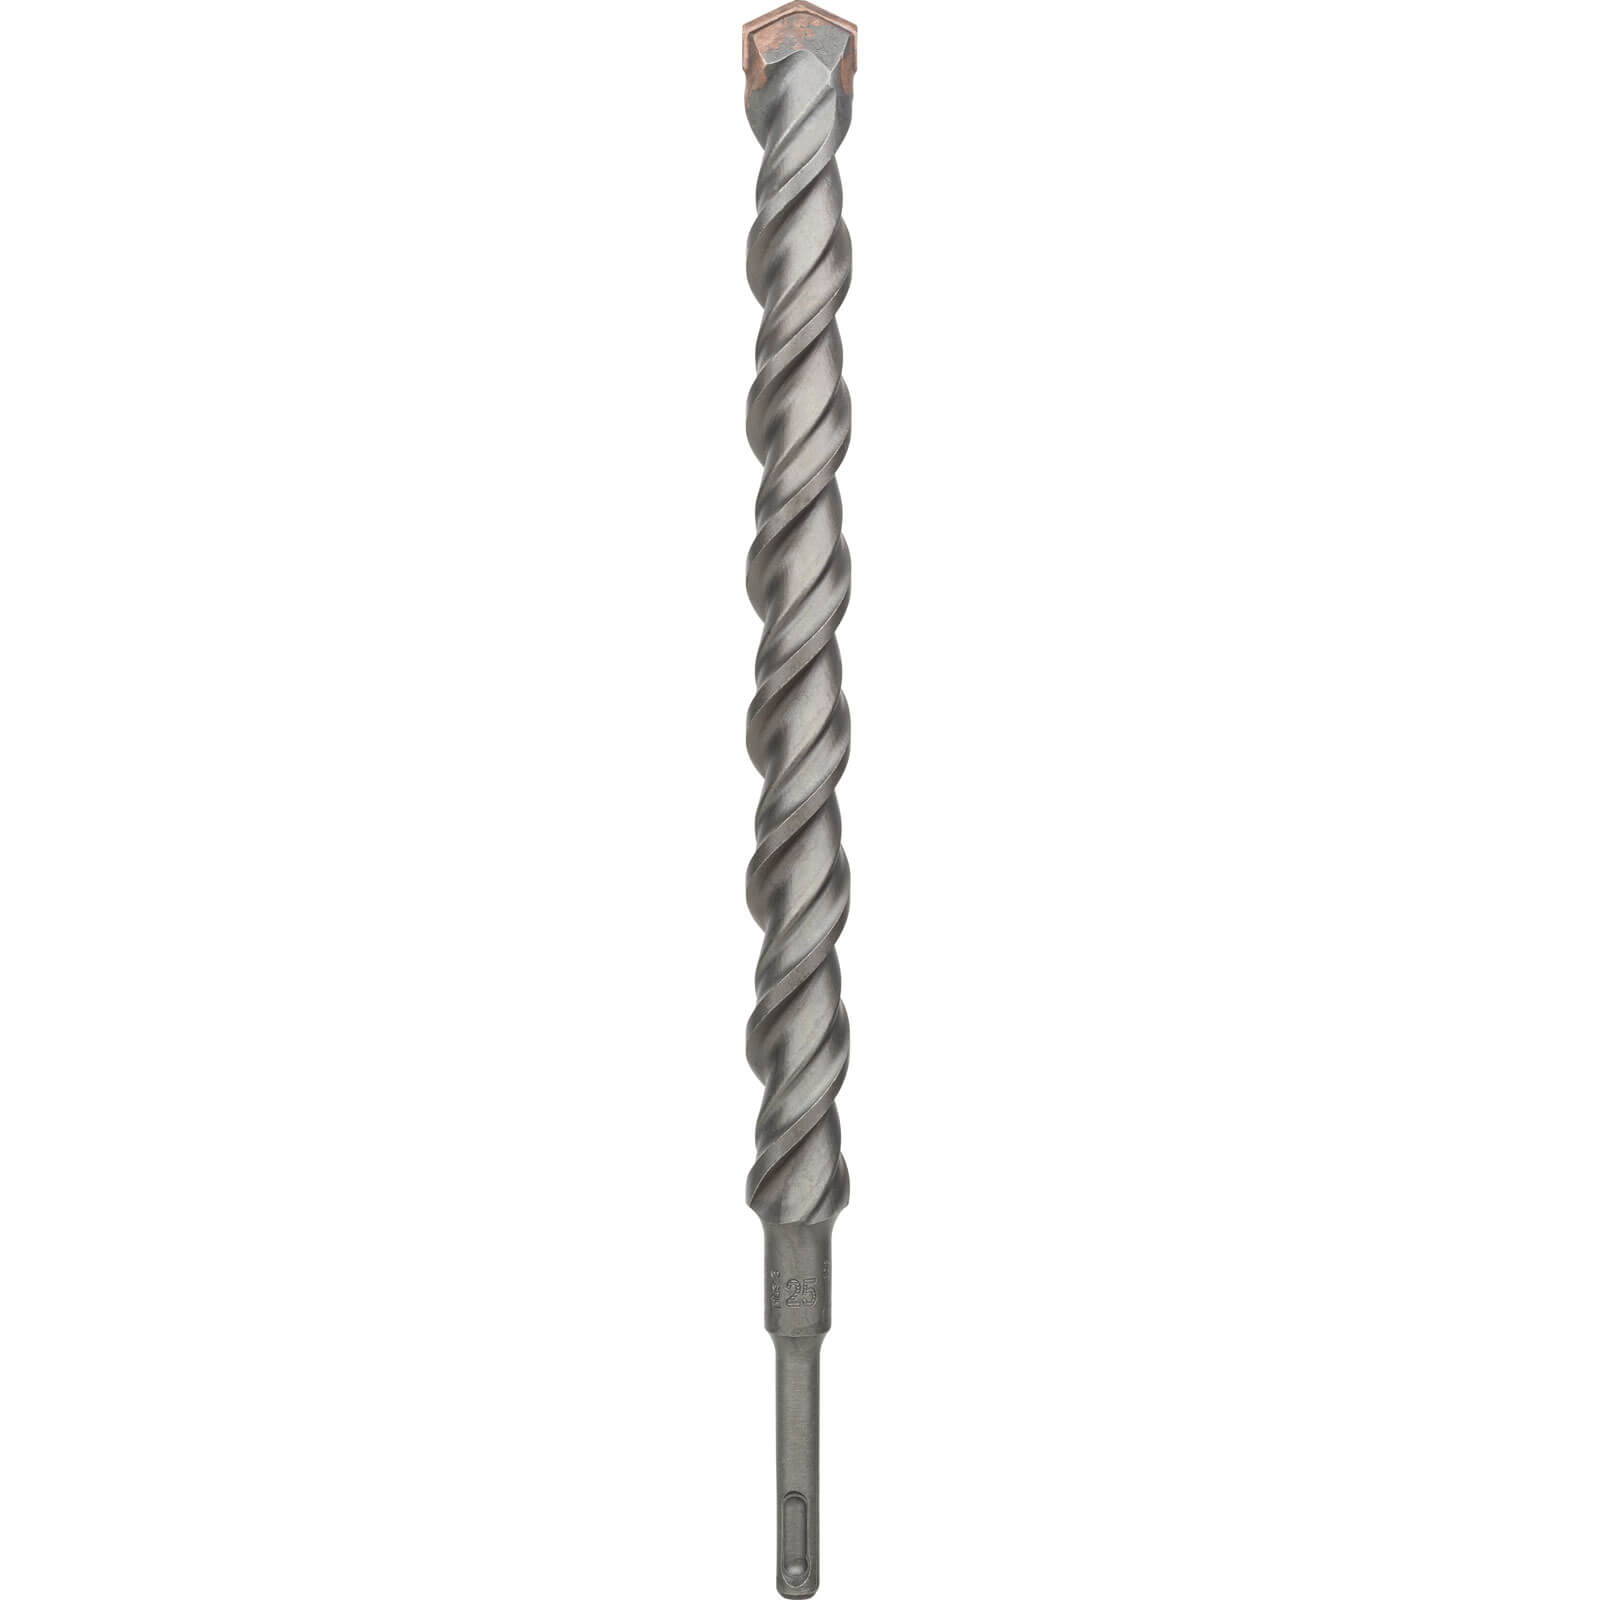 Image of Bosch Series 3 SDS Plus Masonry Drill Bit 25mm 350mm Pack of 1